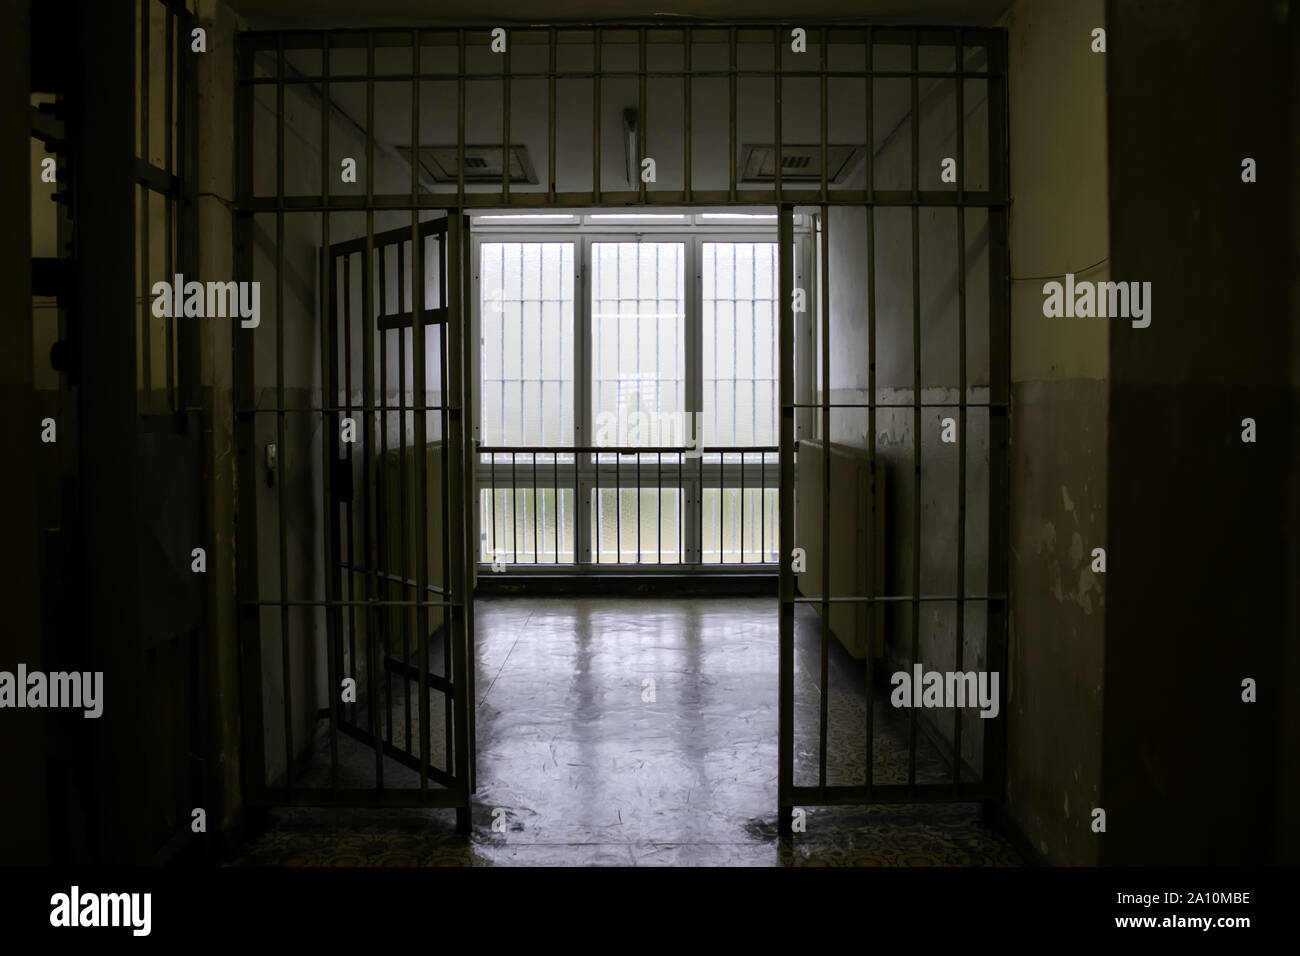 Penitentiary jail with cells, deprivation of liberty, arrests Stock Photo